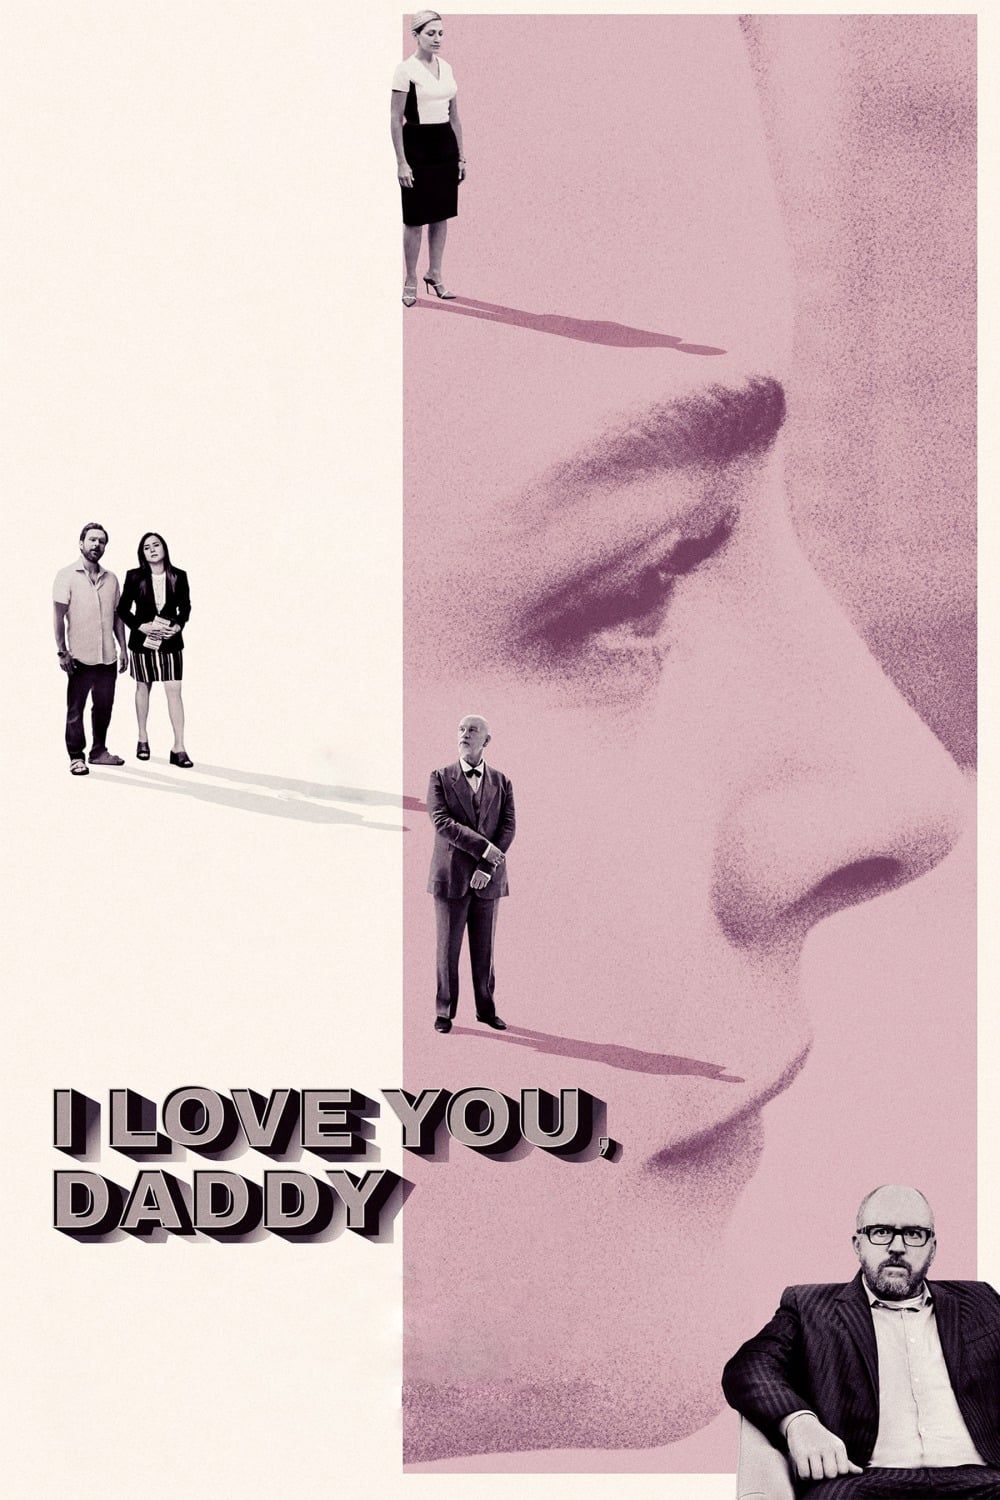 i love you daddy